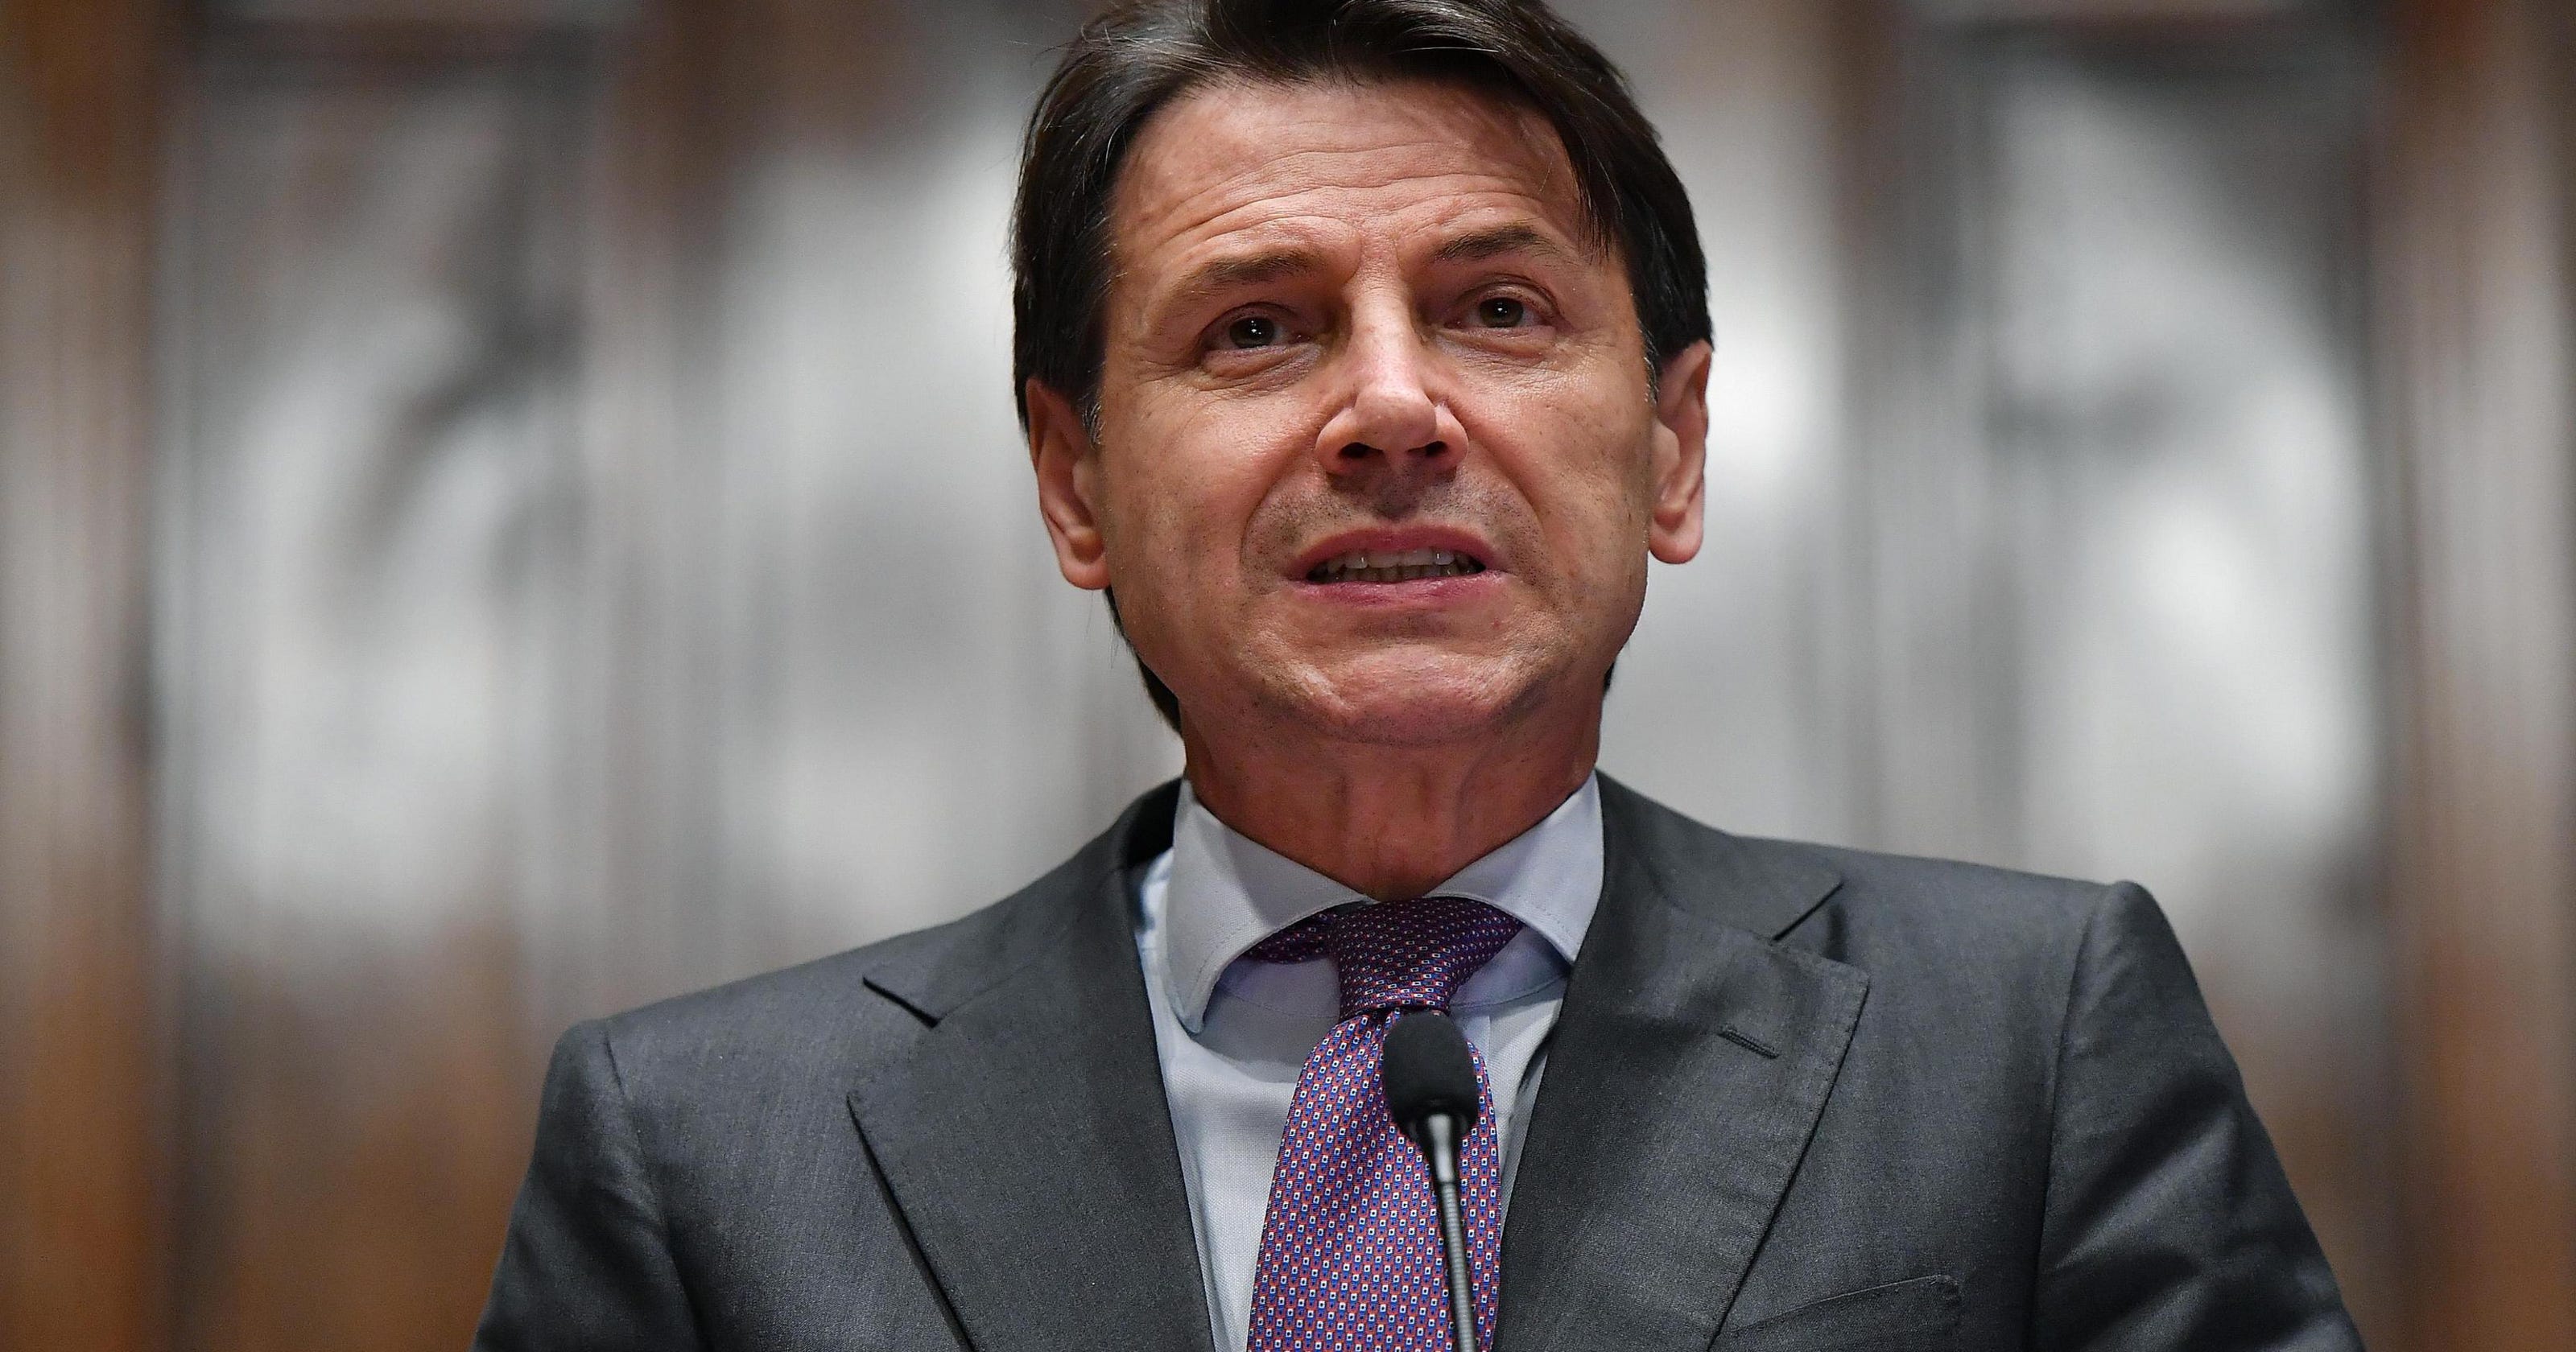 italy-s-giuseppe-conte-next-prime-minister-faces-challenges